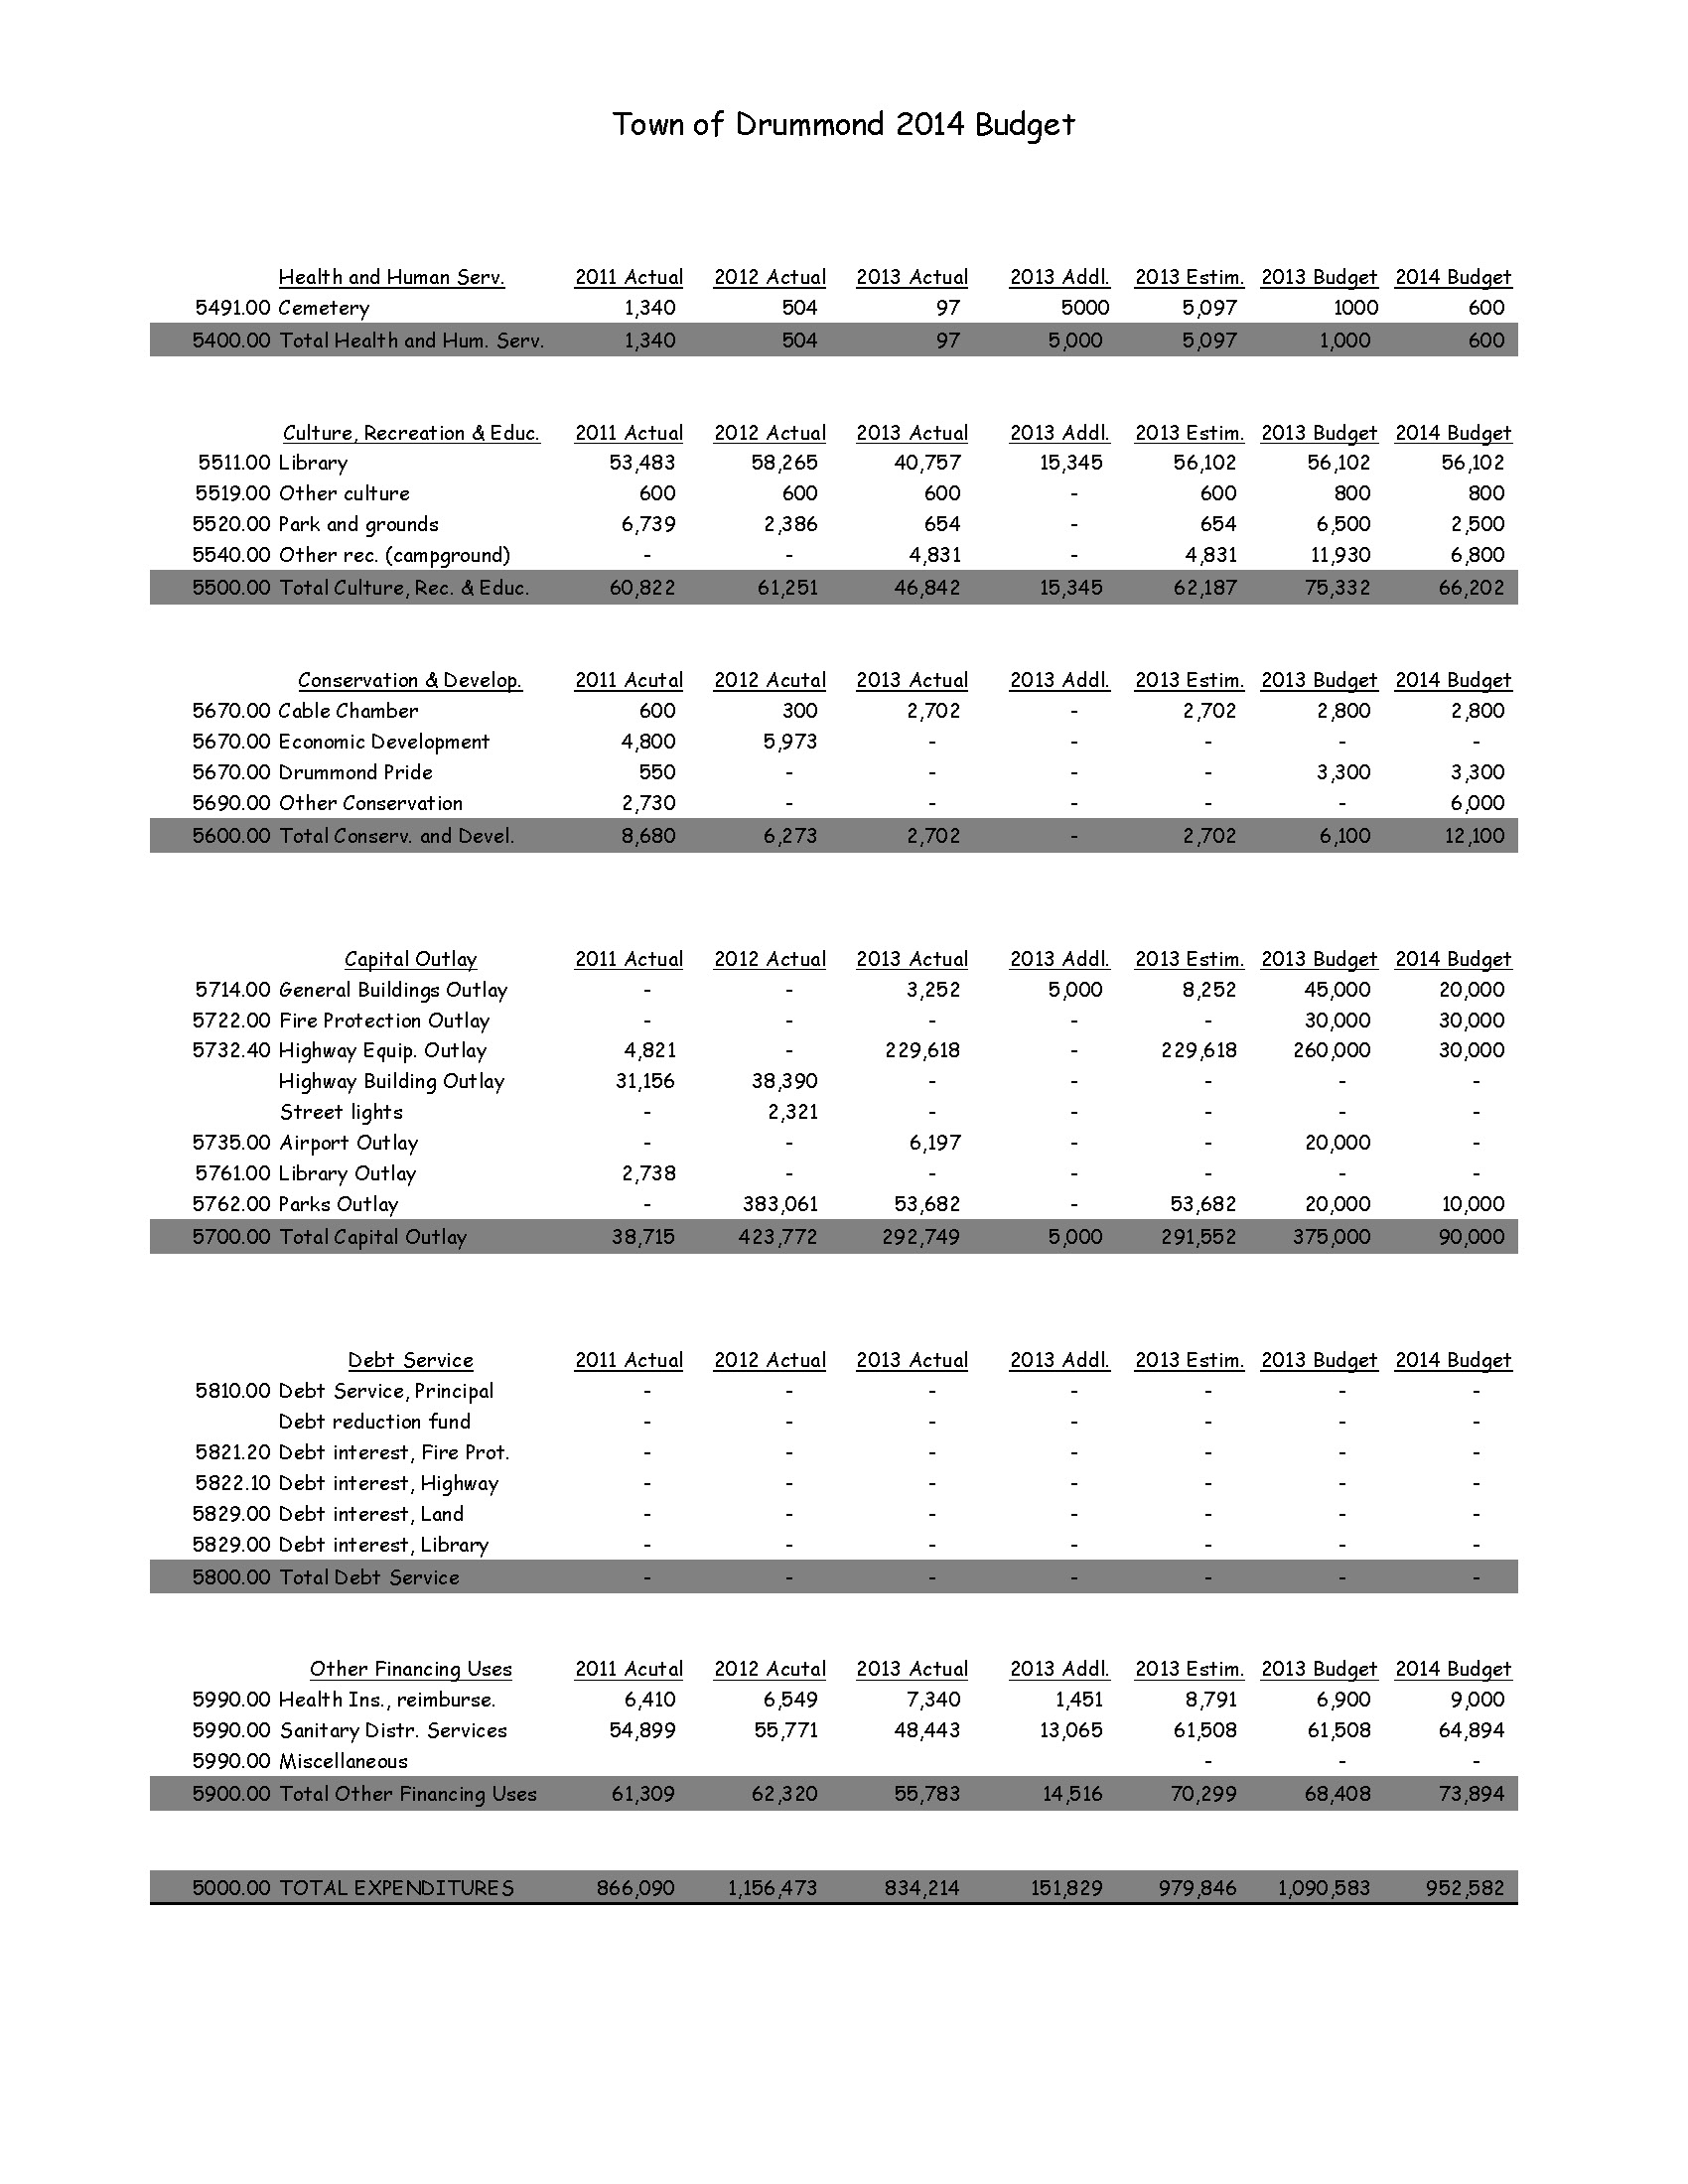 2014-TownBudget-Expenditures_Page_2.jpg